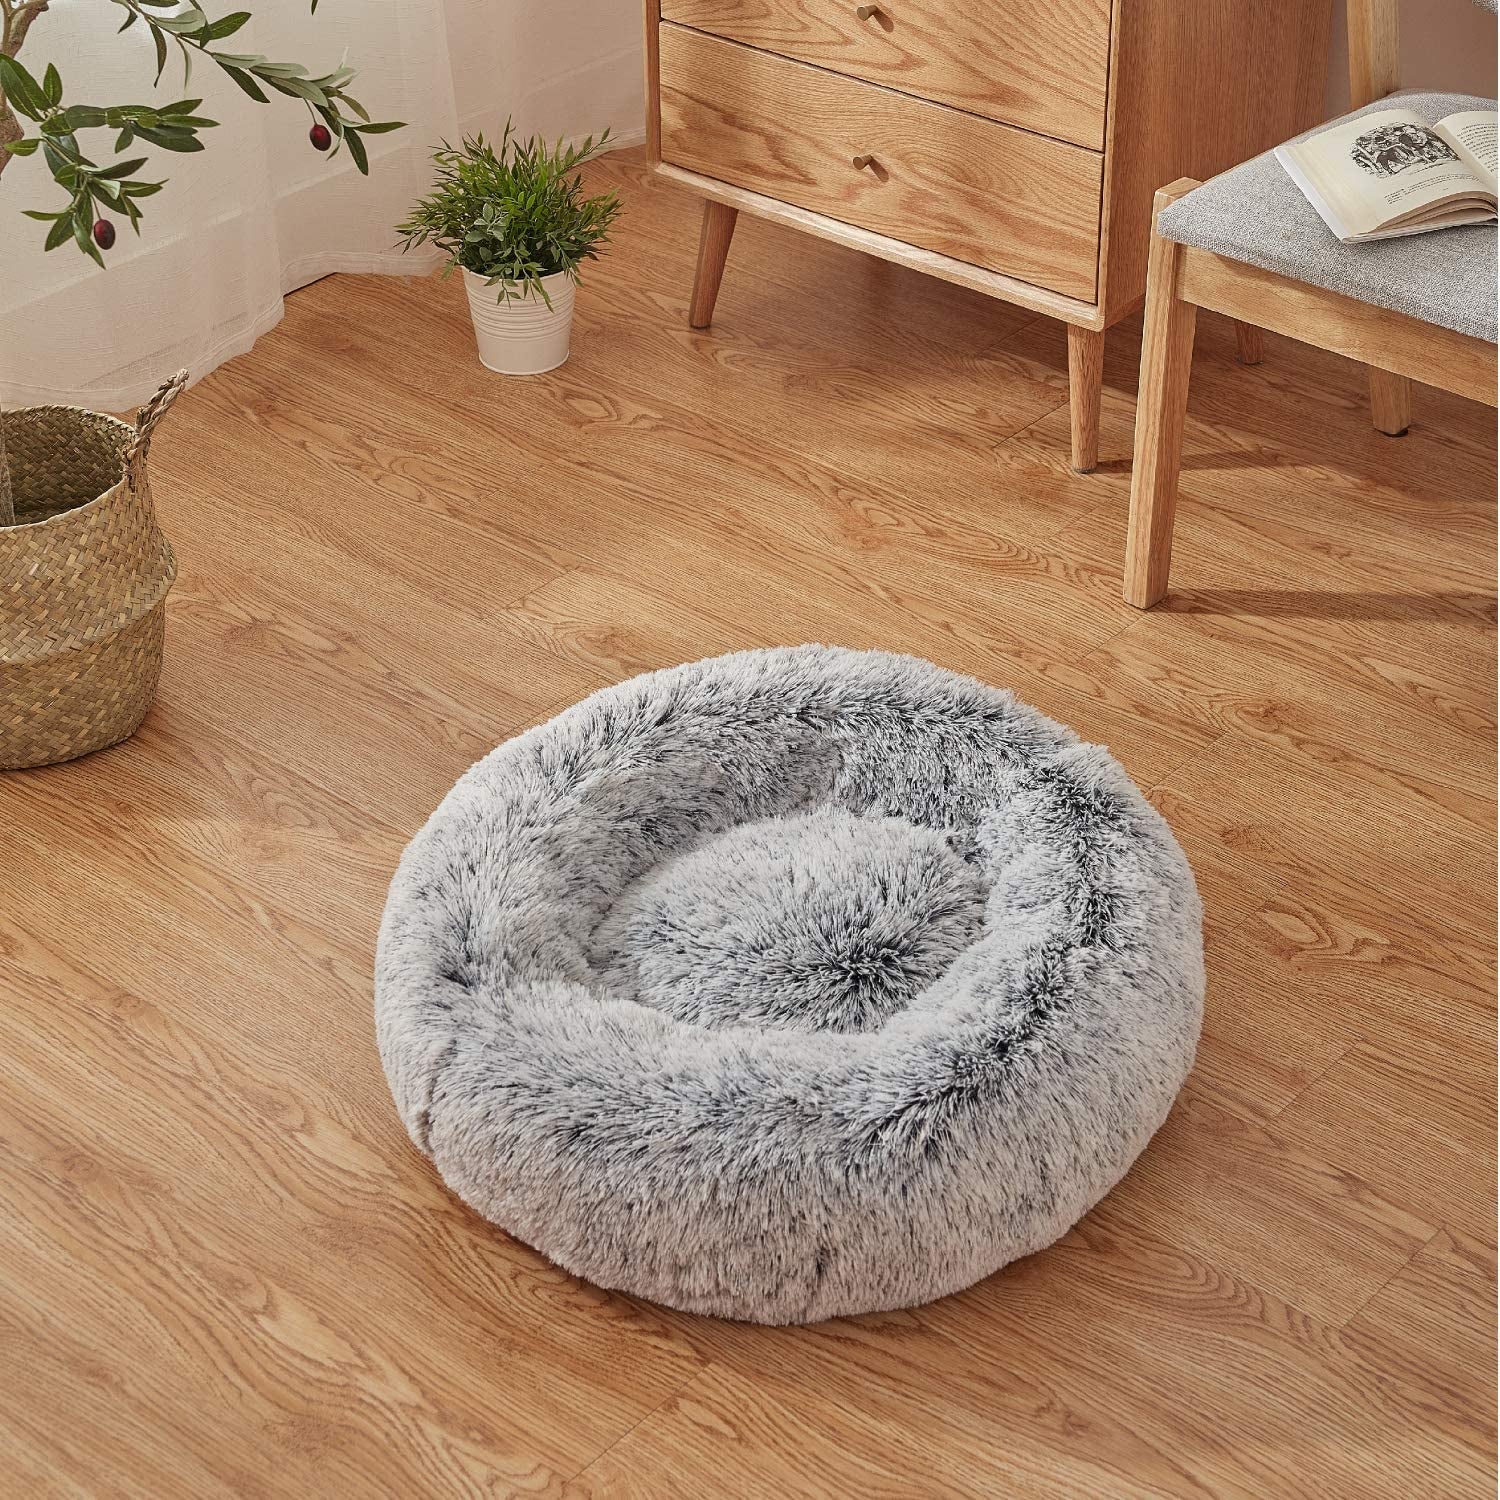 23 Inches Fluffy round Calming Dog Bed Plush Faux Fur, Anxiety Donut Dog Bed for Small Dogs and Cats, Pet Cat Bed with Raised Rim, Machine Washable, Light Grey